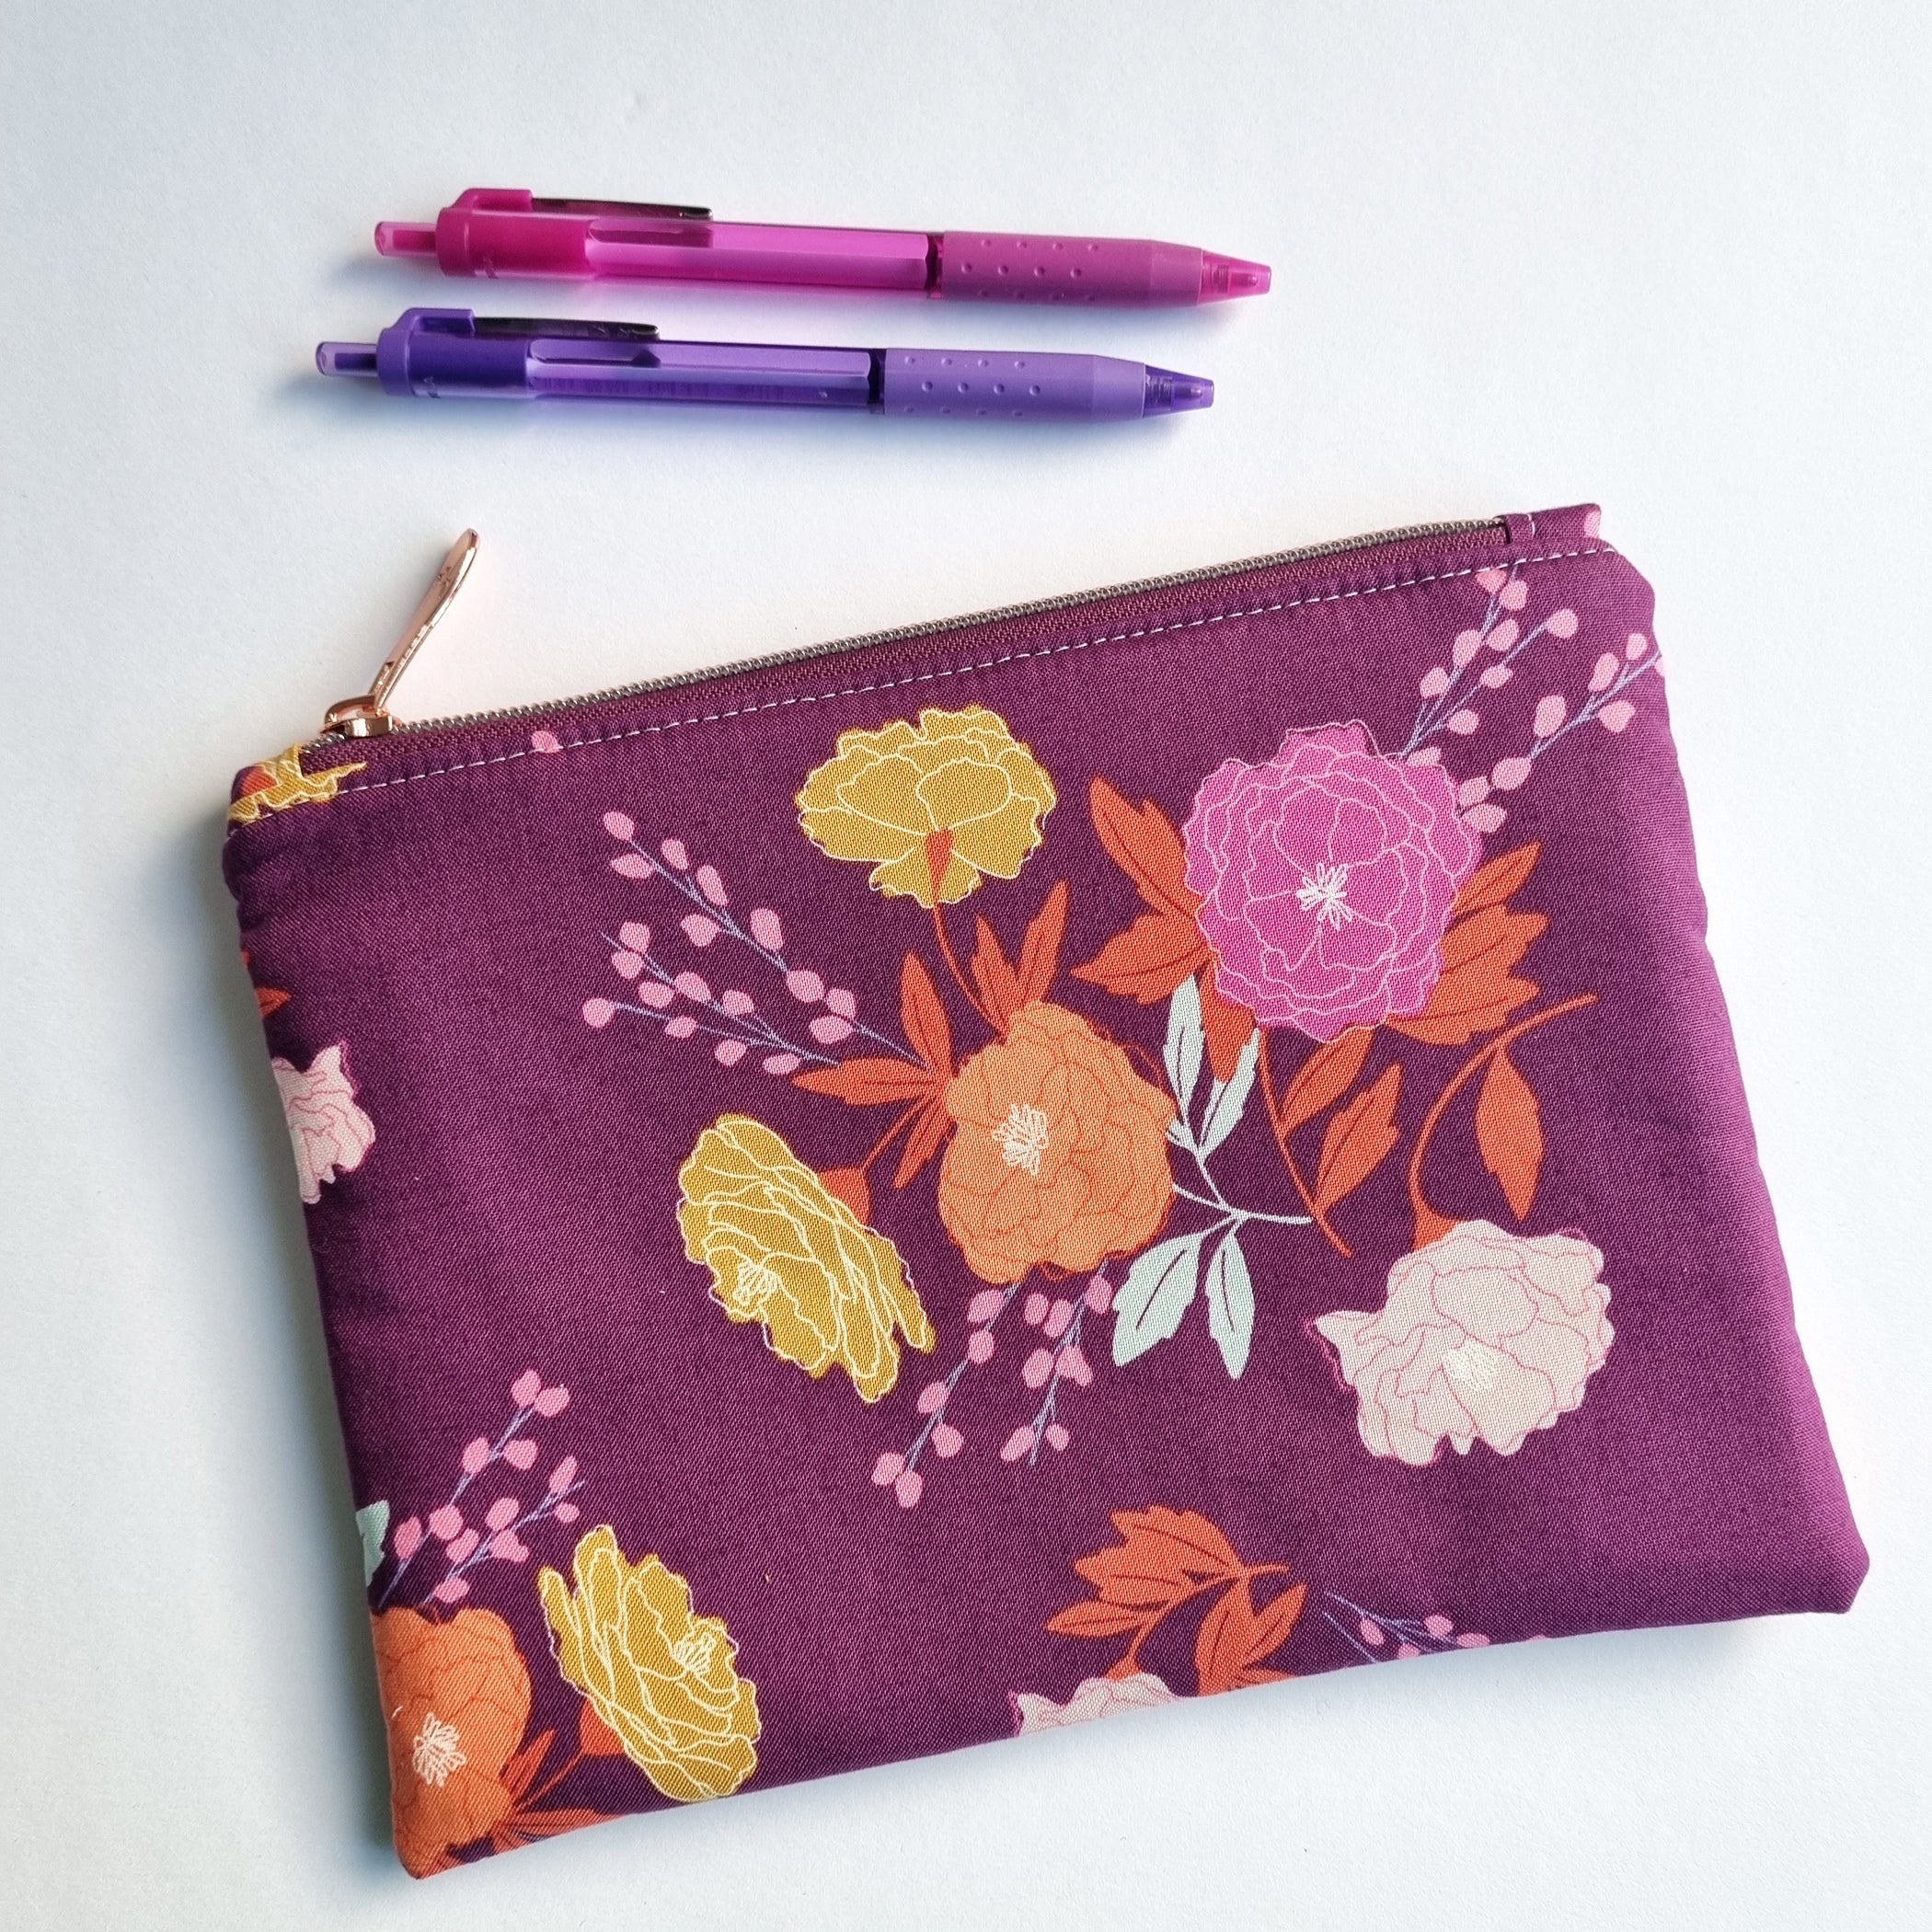 14 Pretty Pencil Pouch Sewing Patterns - All Free